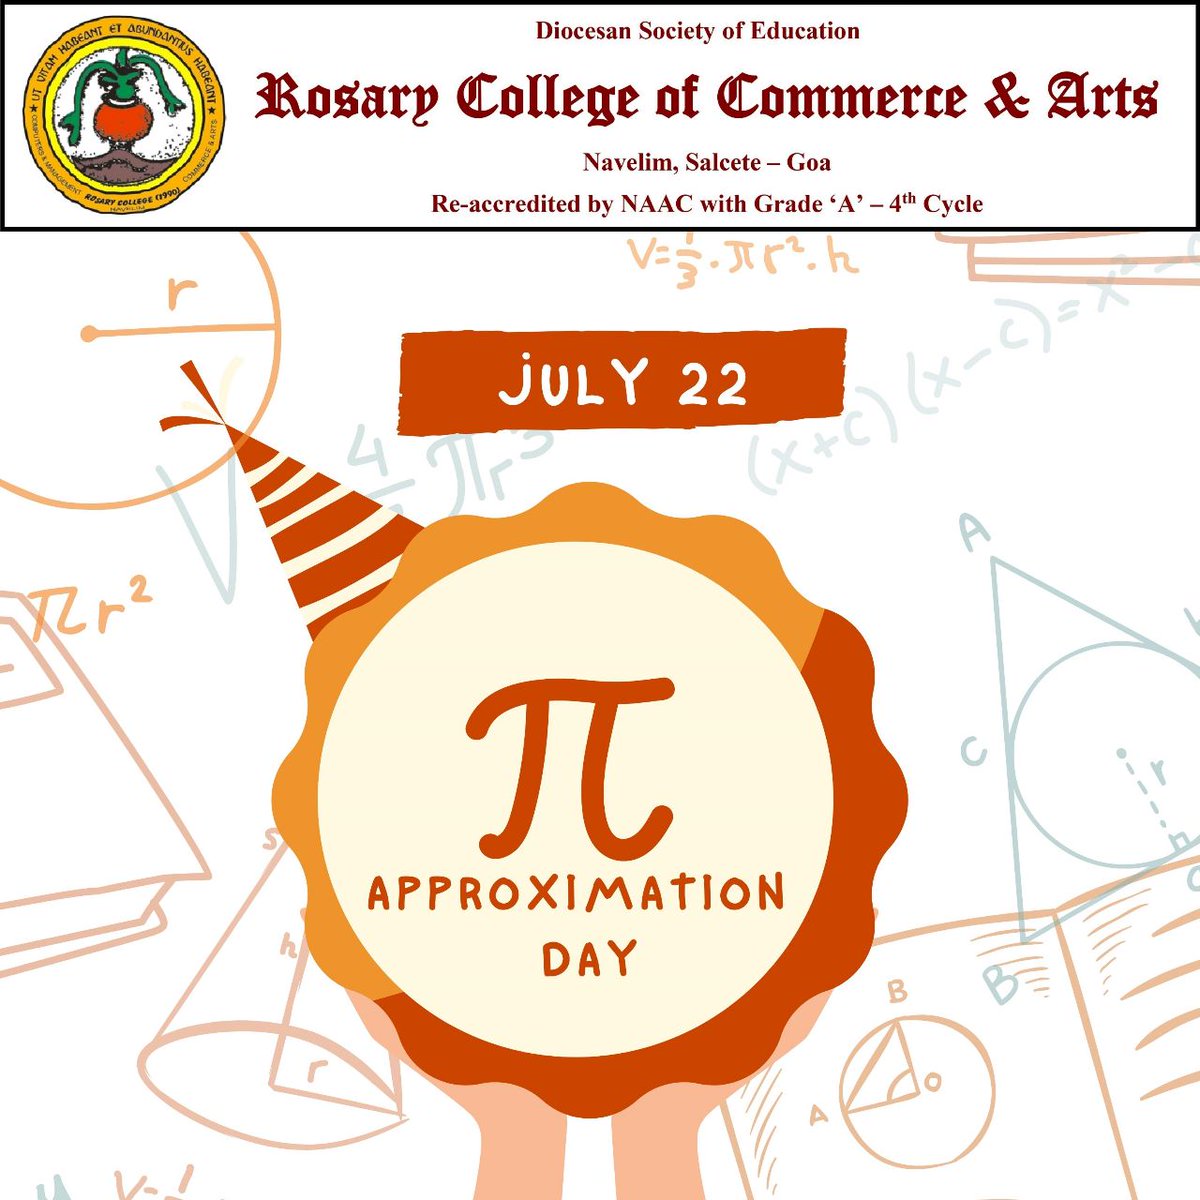 🥧 Happy Pi Approximation Day! 🤓🎉 Let's raise a π and celebrate the infinite wonder of mathematics! 📐🔢 #RCCA #PiApproximationDay  #InfiniteWonders @eduminofindia